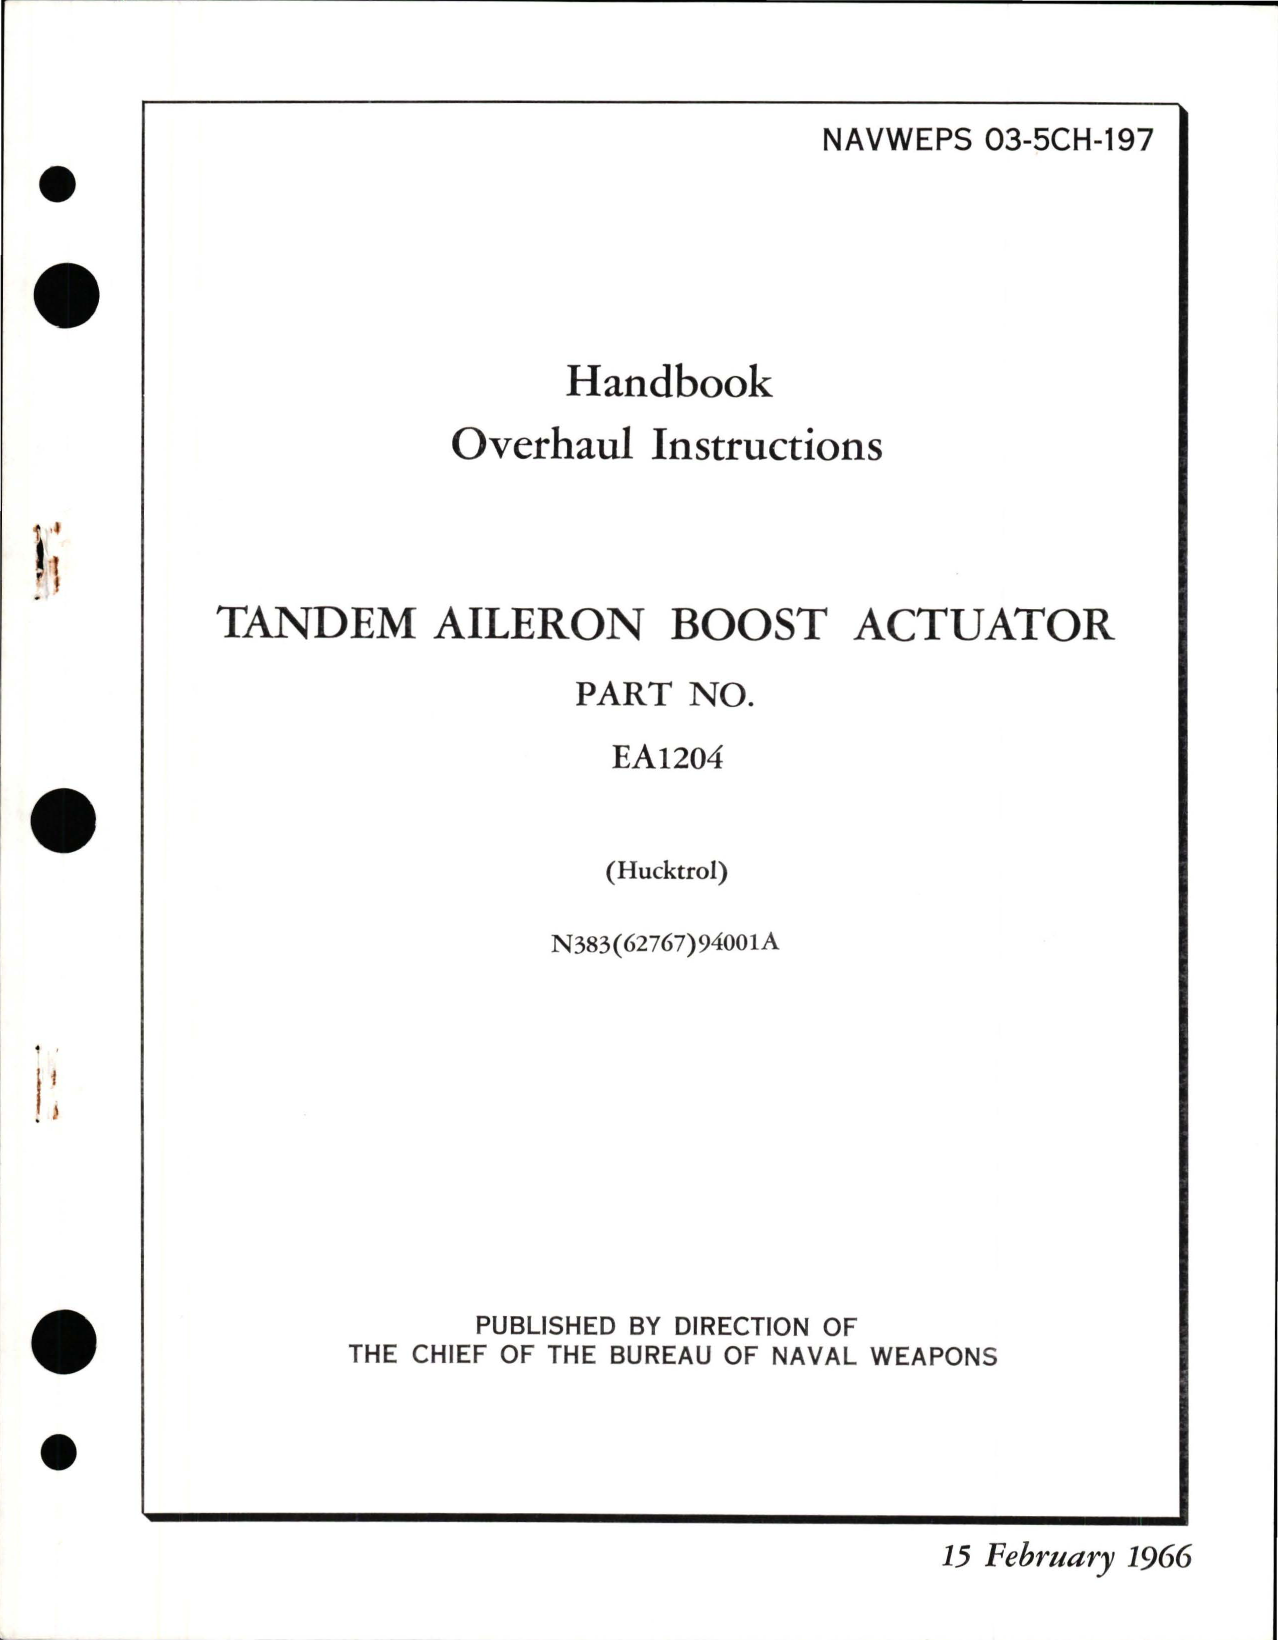 Sample page 1 from AirCorps Library document: Overhaul Instructions for Tandem Aileron Boost Actuator - Part EA1204